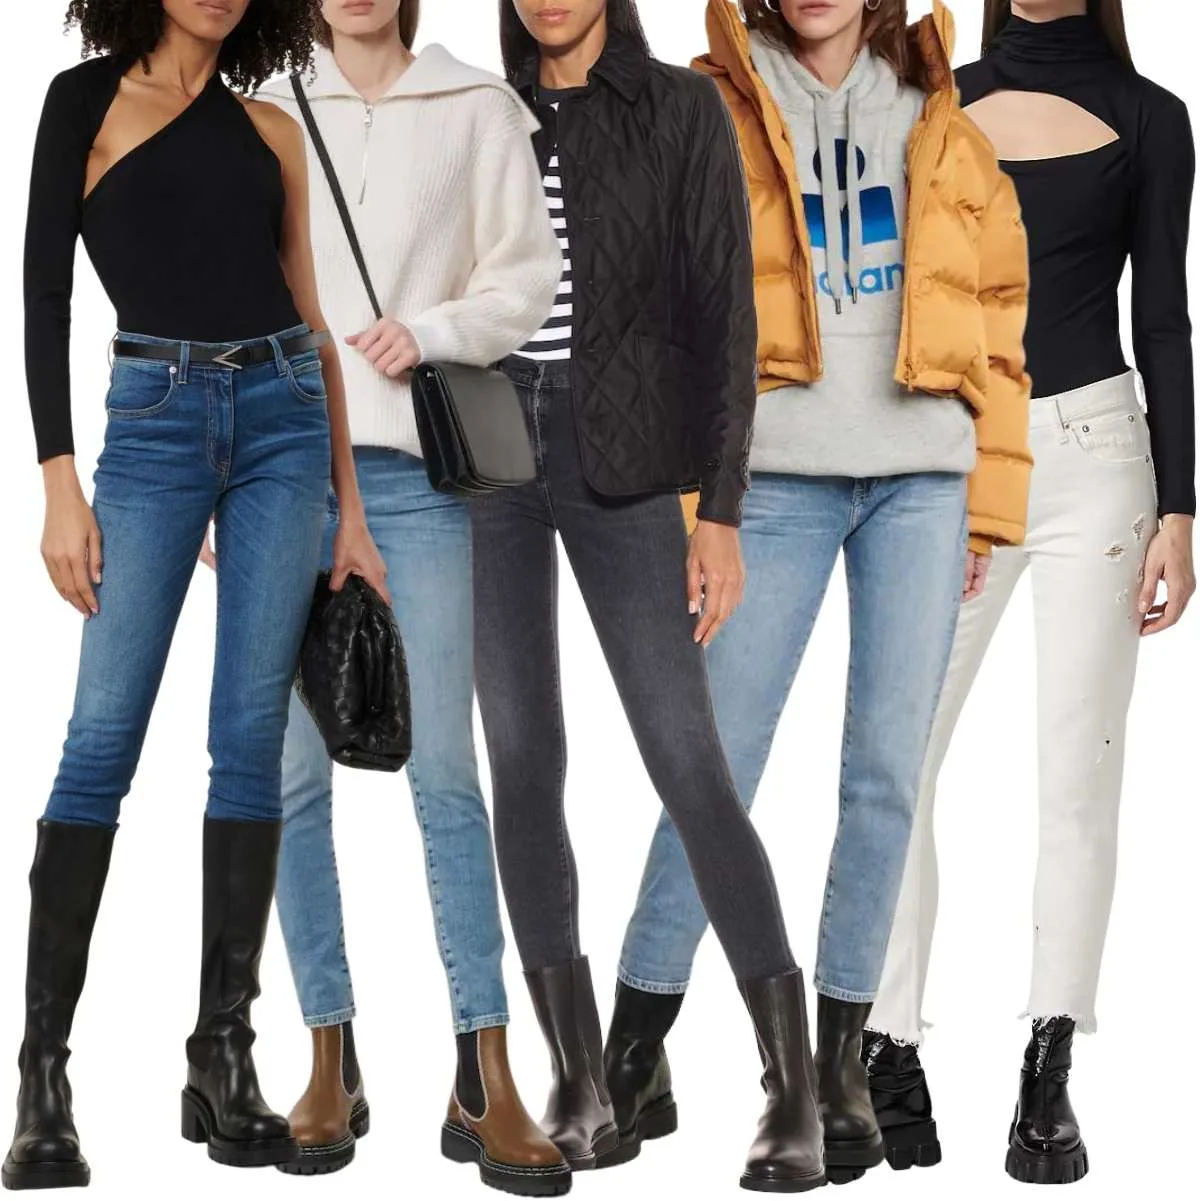 Collage of 5 women wearing chelsea boots with skinny jeans outfits.